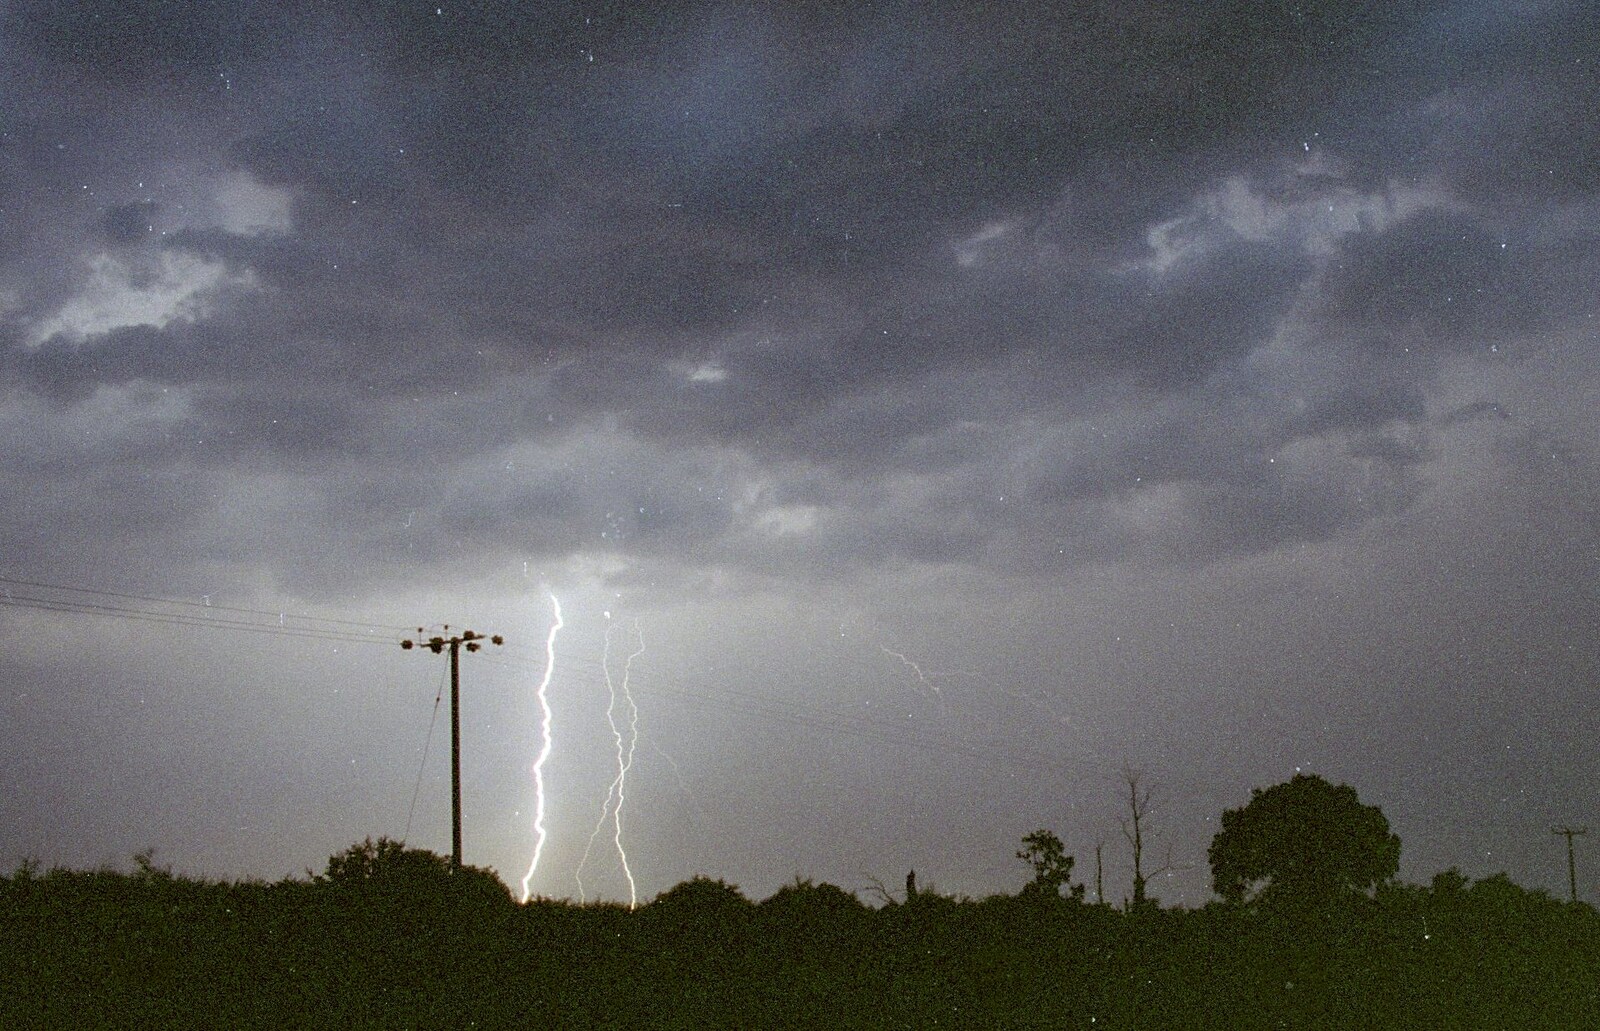 Multiple lightning strike over the side field from House Renovation Randomness and a Spot of Lightning, Brome, Suffolk - 19th June 1994